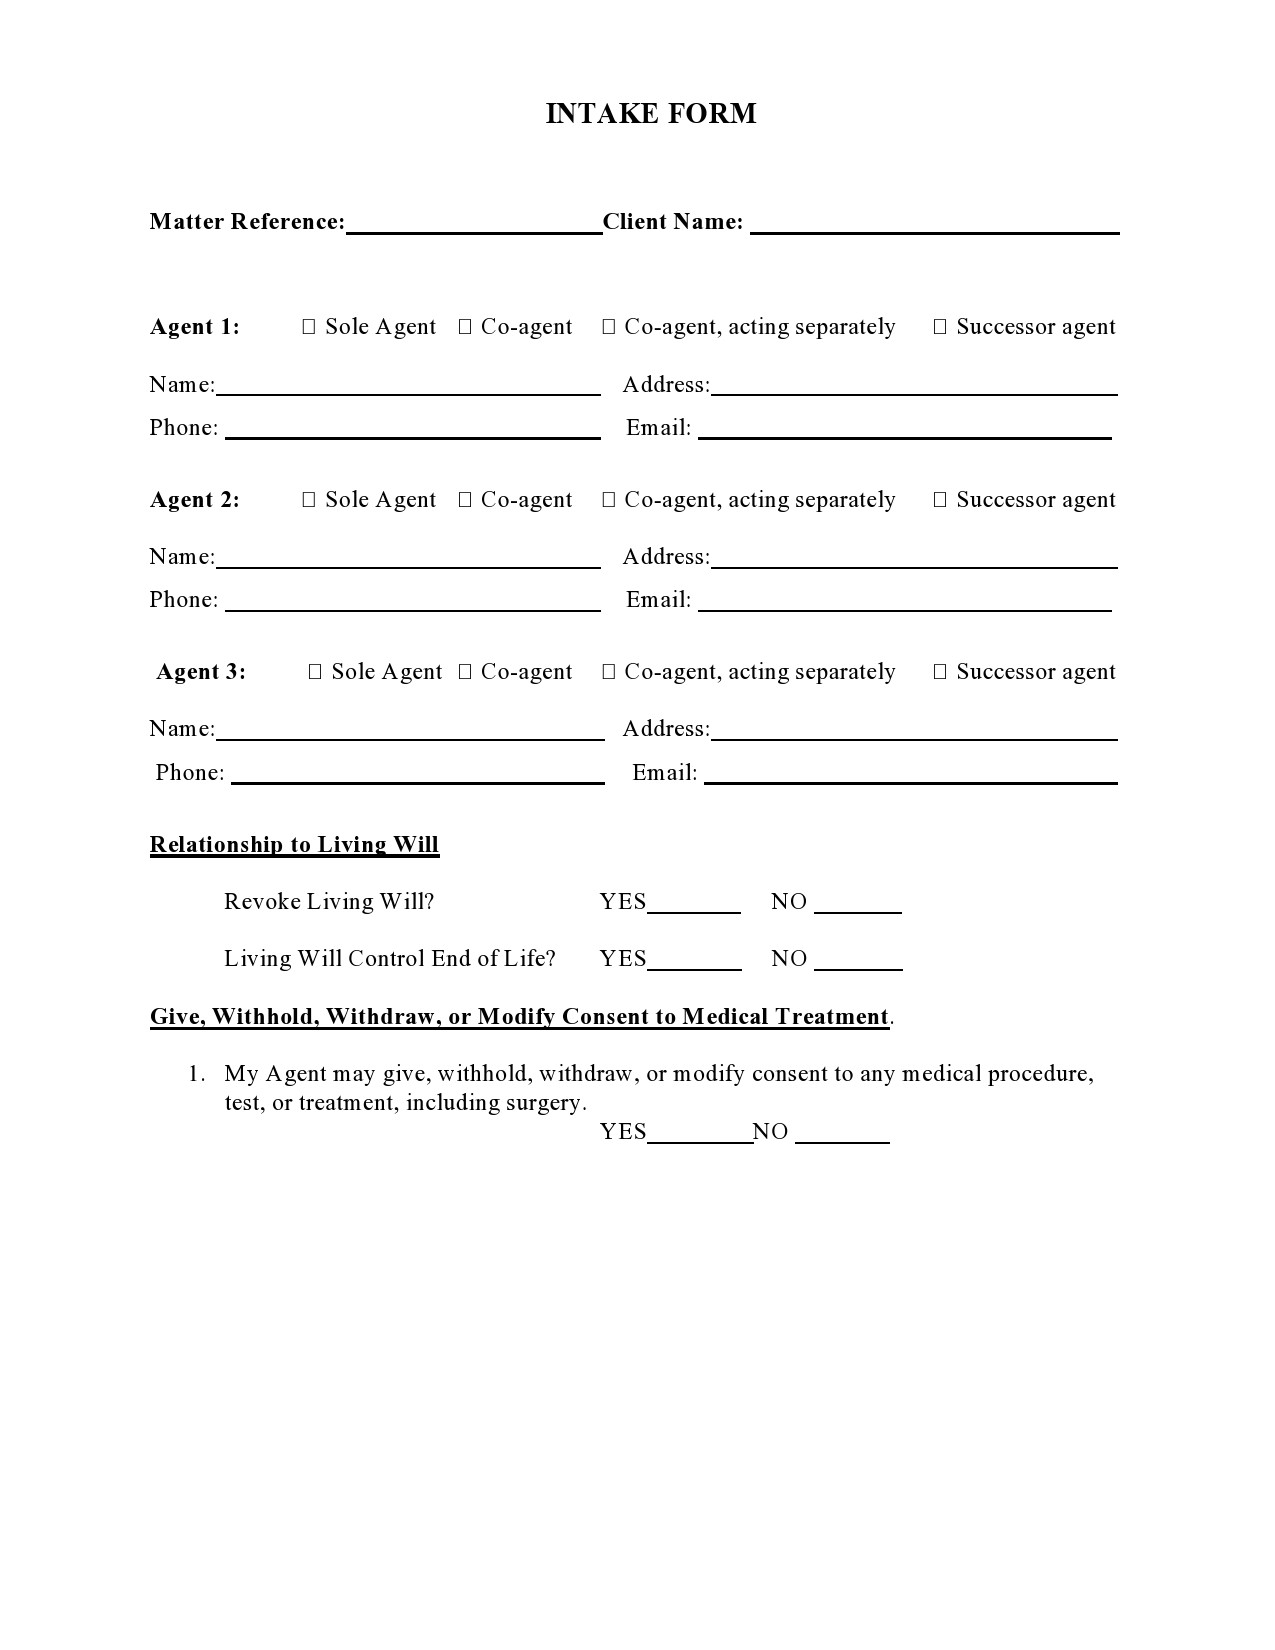 Free client intake form 13